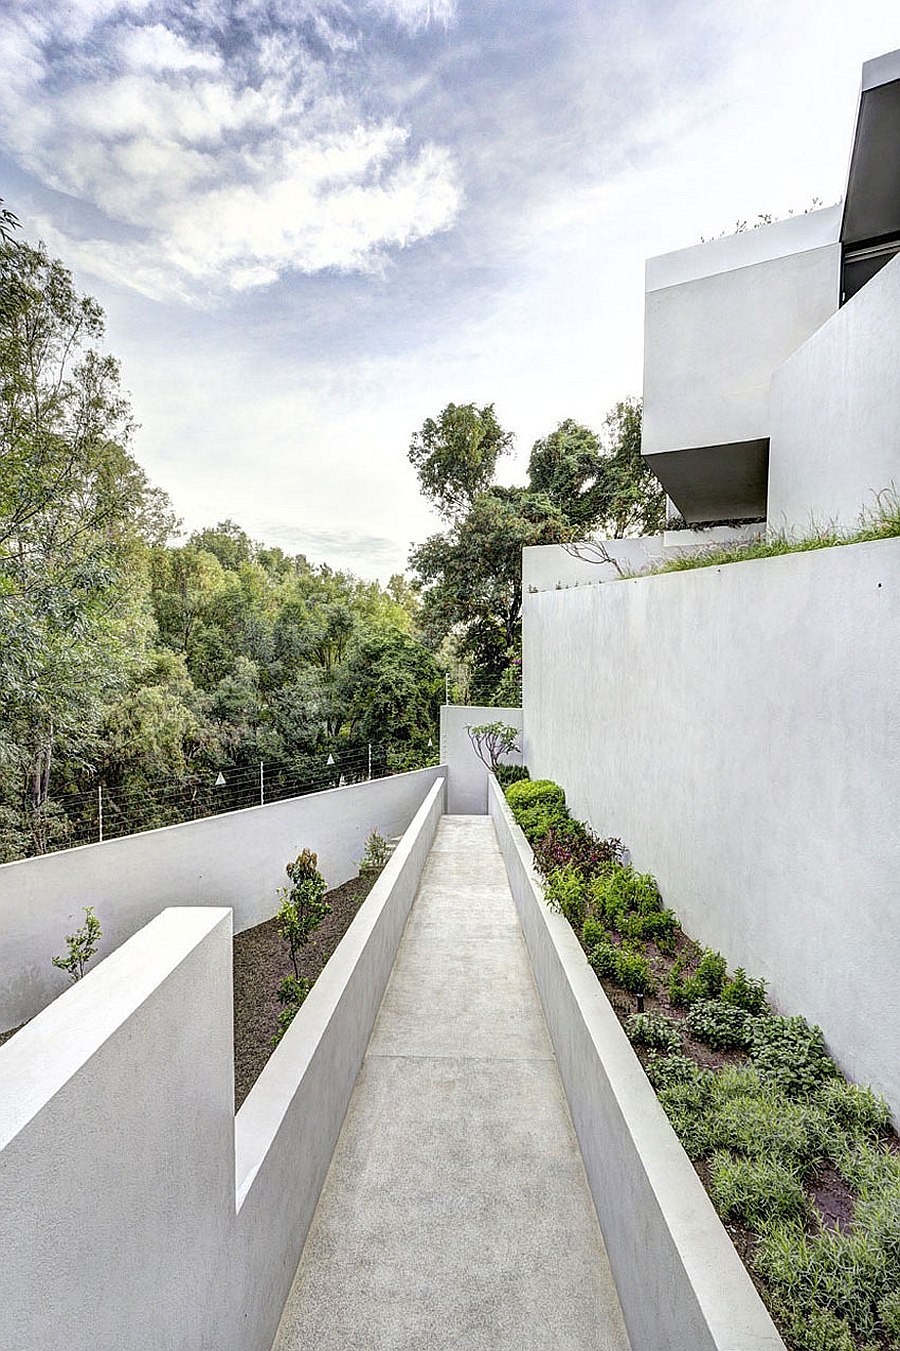 Concrete walkway surrounded by greenery